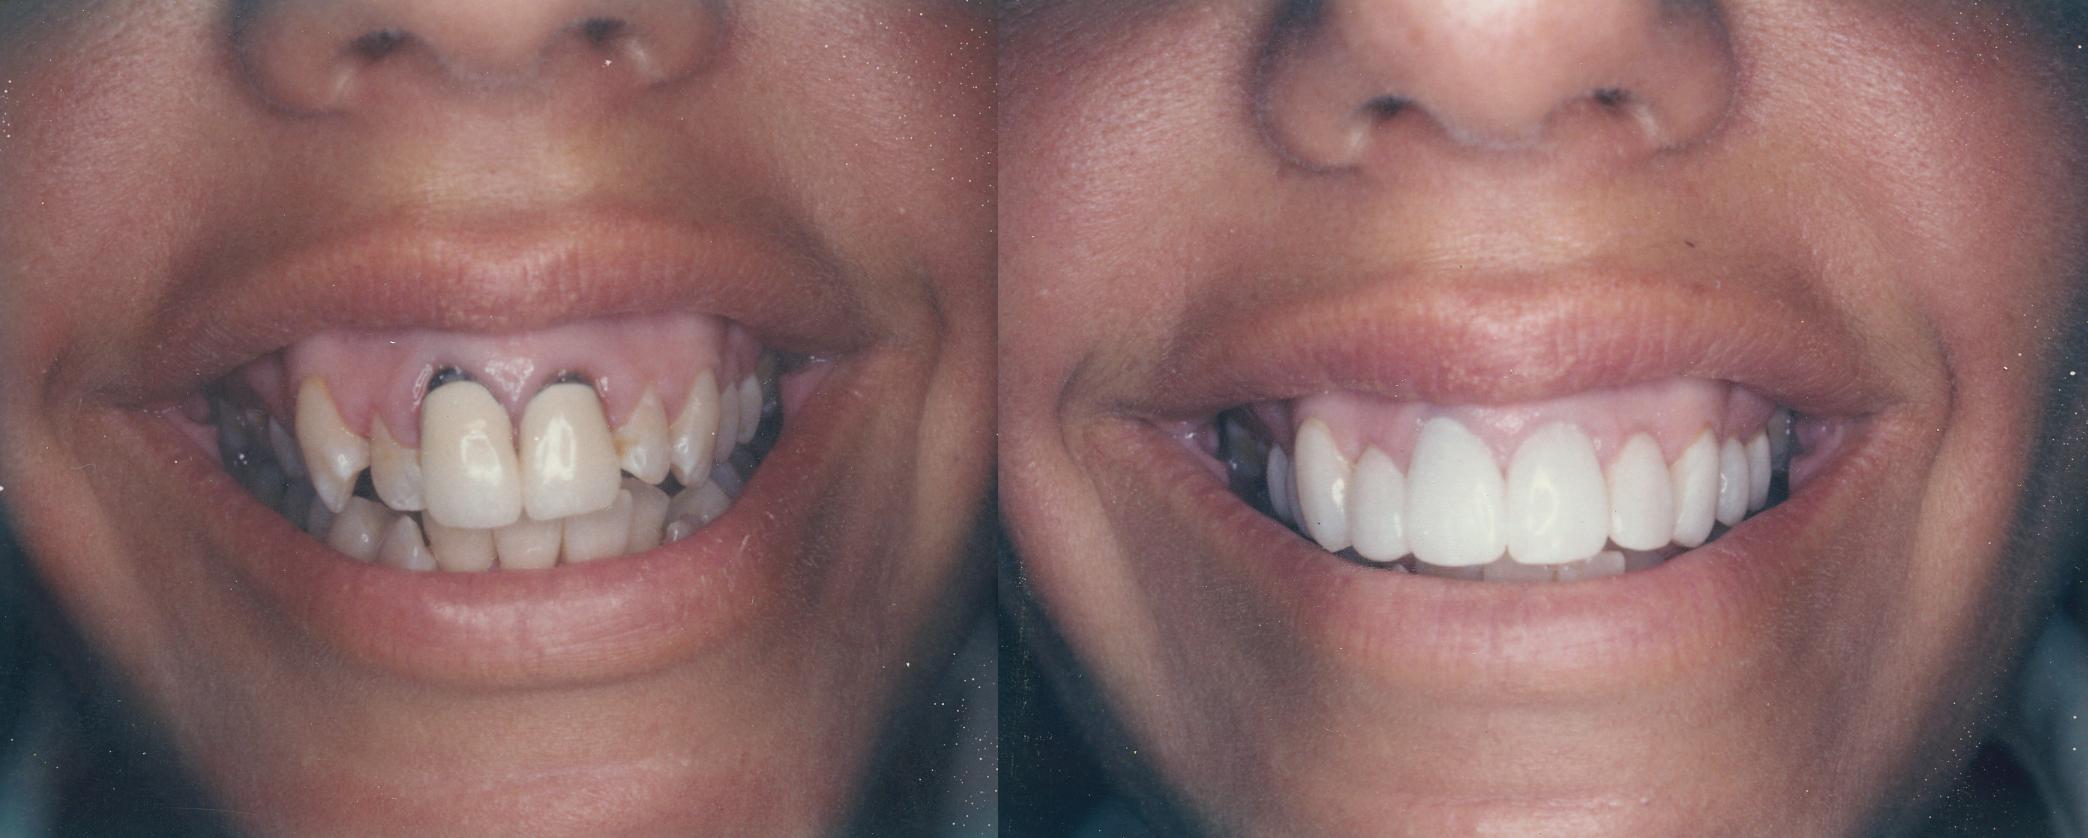 Invisalign Braces Before and After Review [VIDEO]